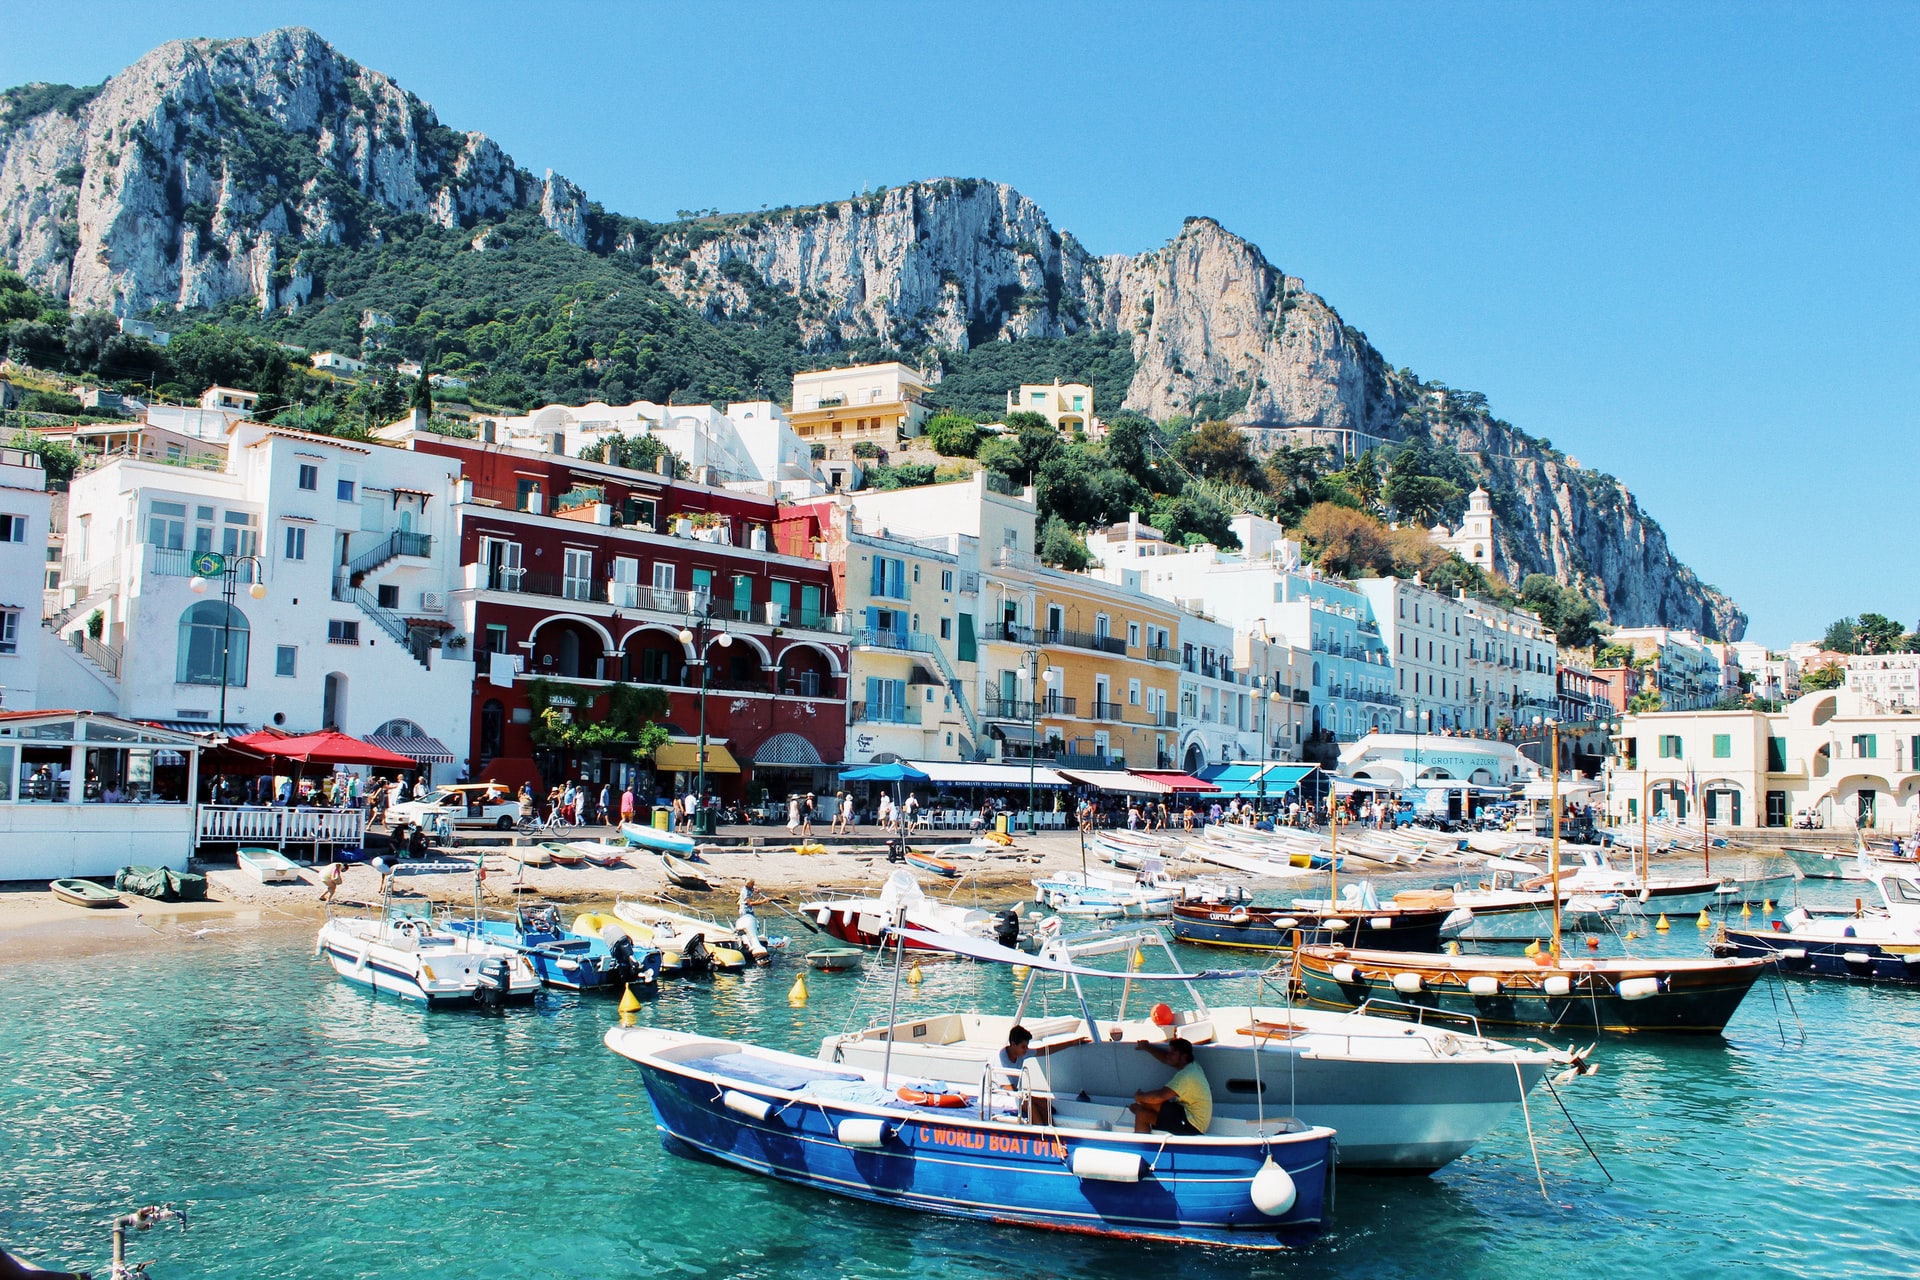 Why Capri should be on your bucket list!